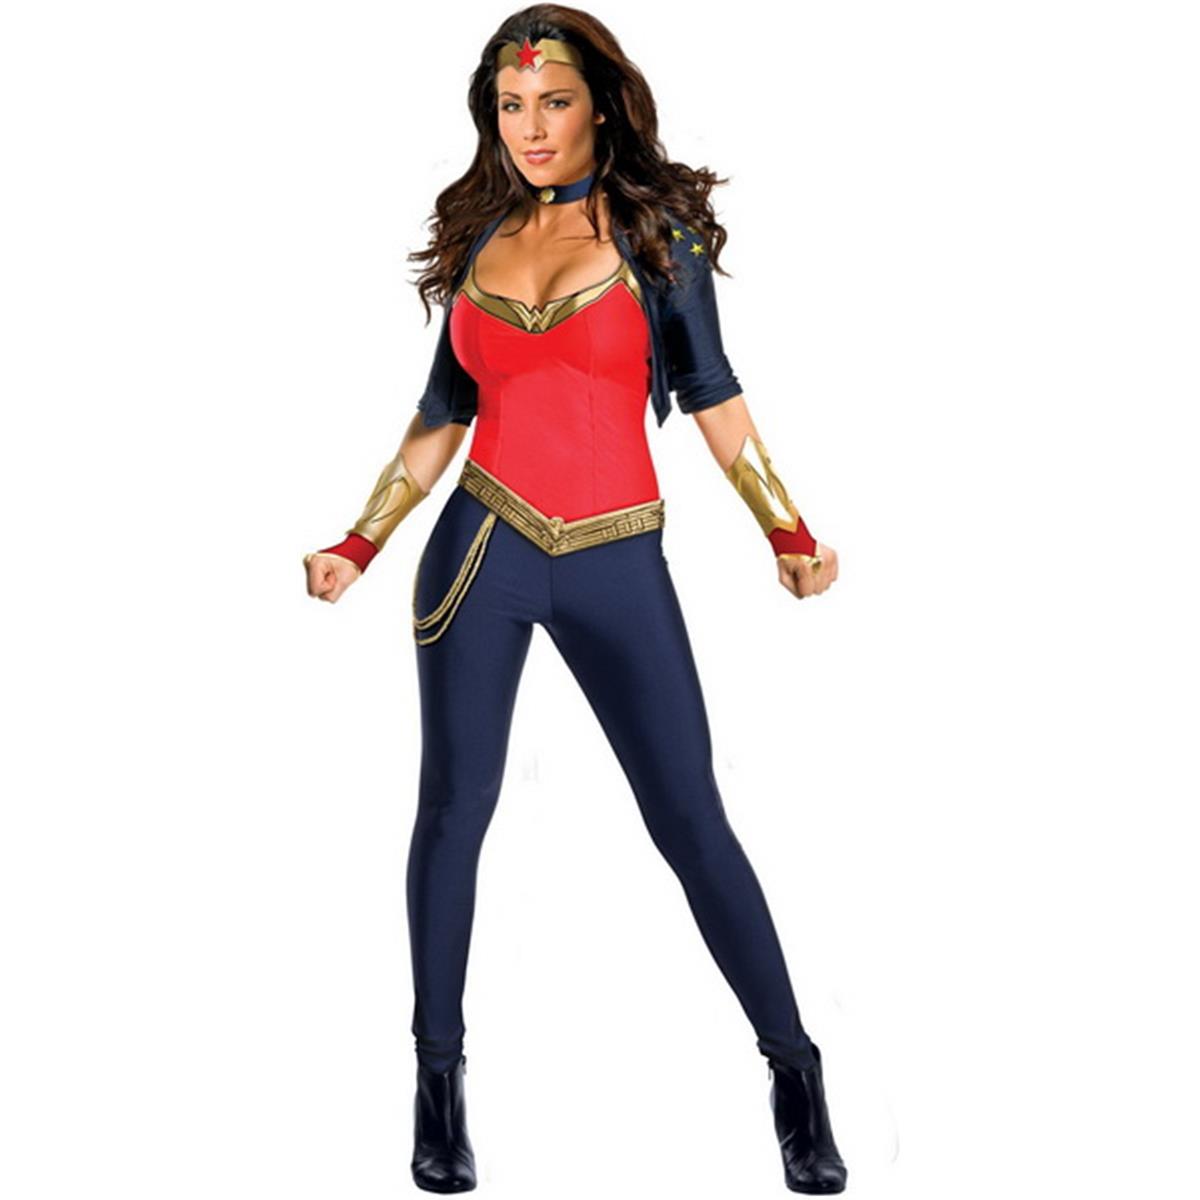 212011 Wonder Woman Deluxe Adult Costume - Blue, Extra Small